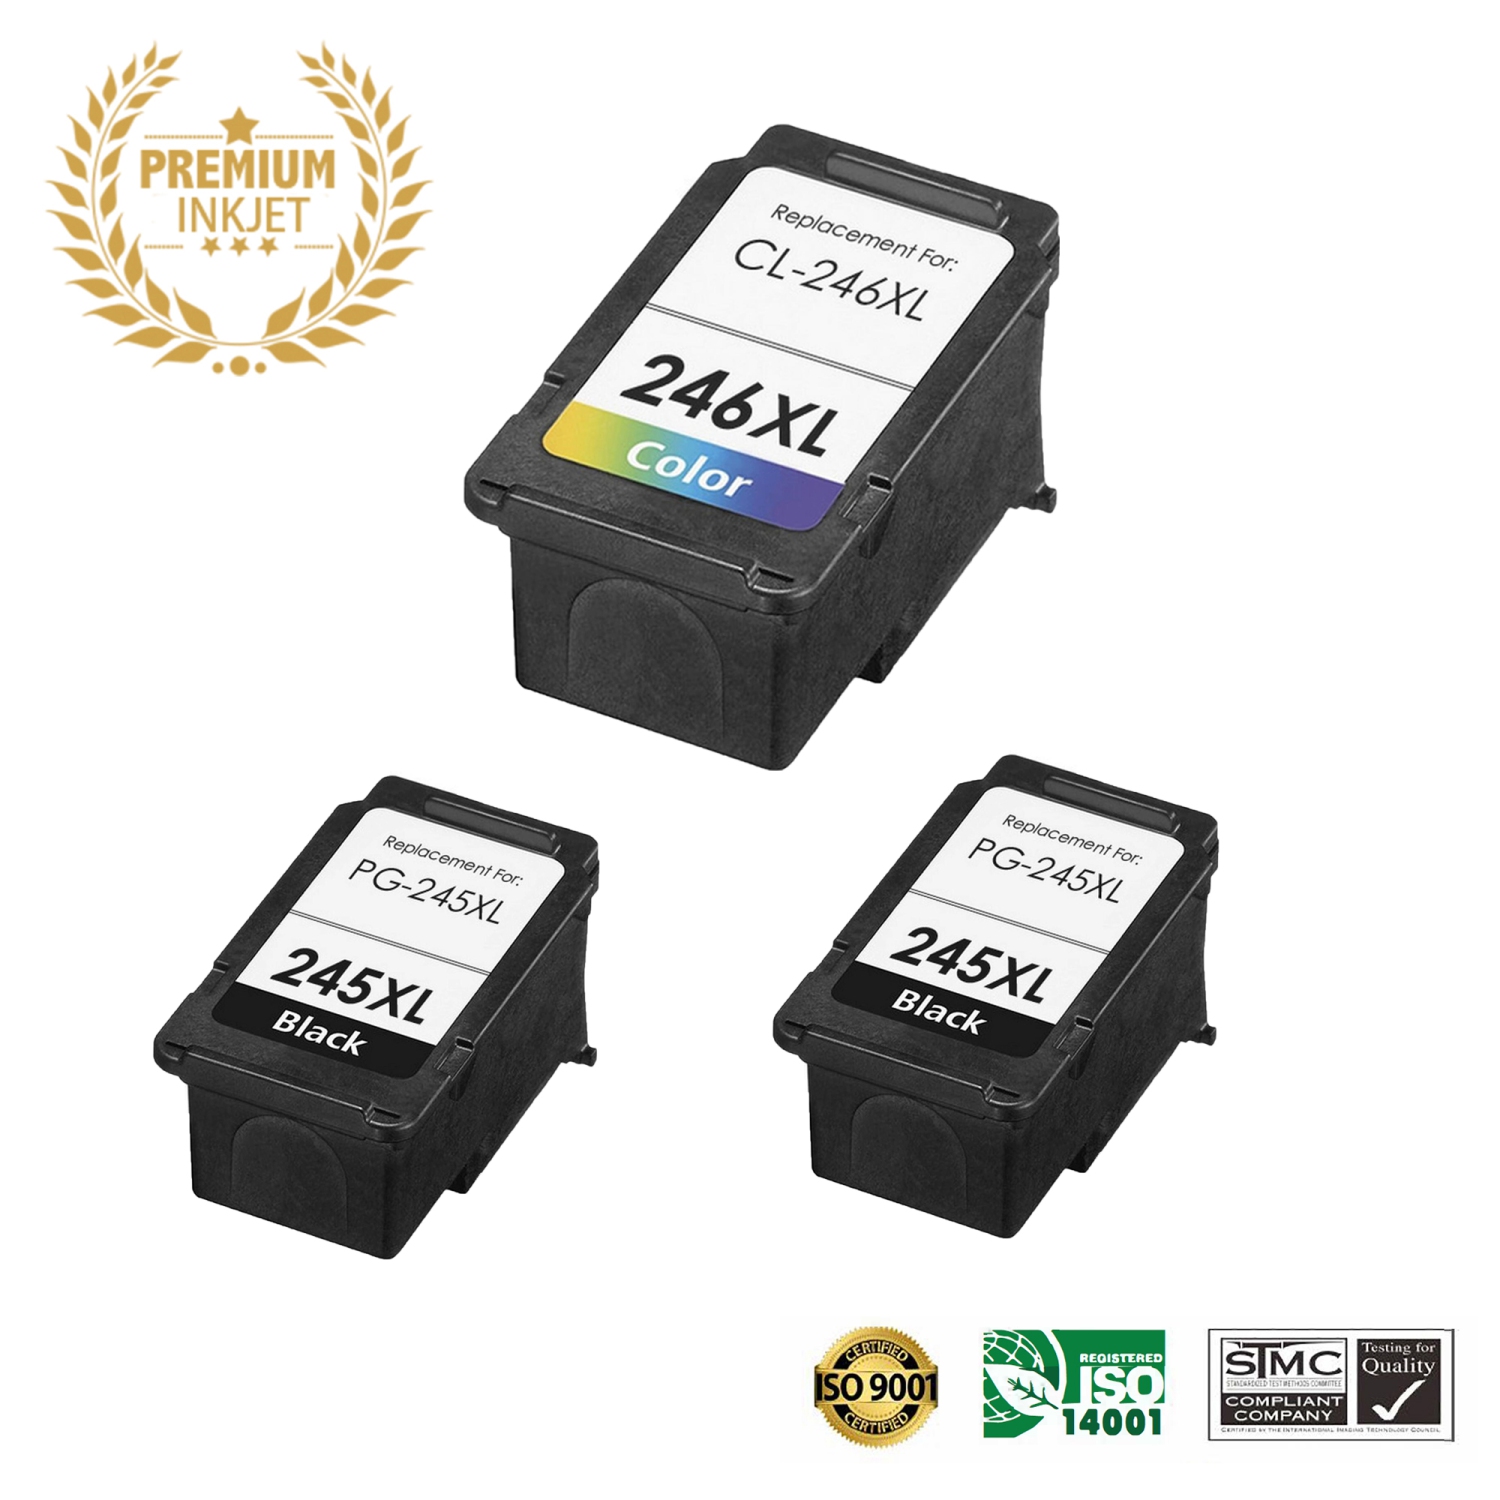 3 PACK Canon PG-245XL CL-246XL/PG245 CL246/canon 245 246 Remanufactured Ink Cartridge for Canon MG2520 TR4520 TR4500 TS302